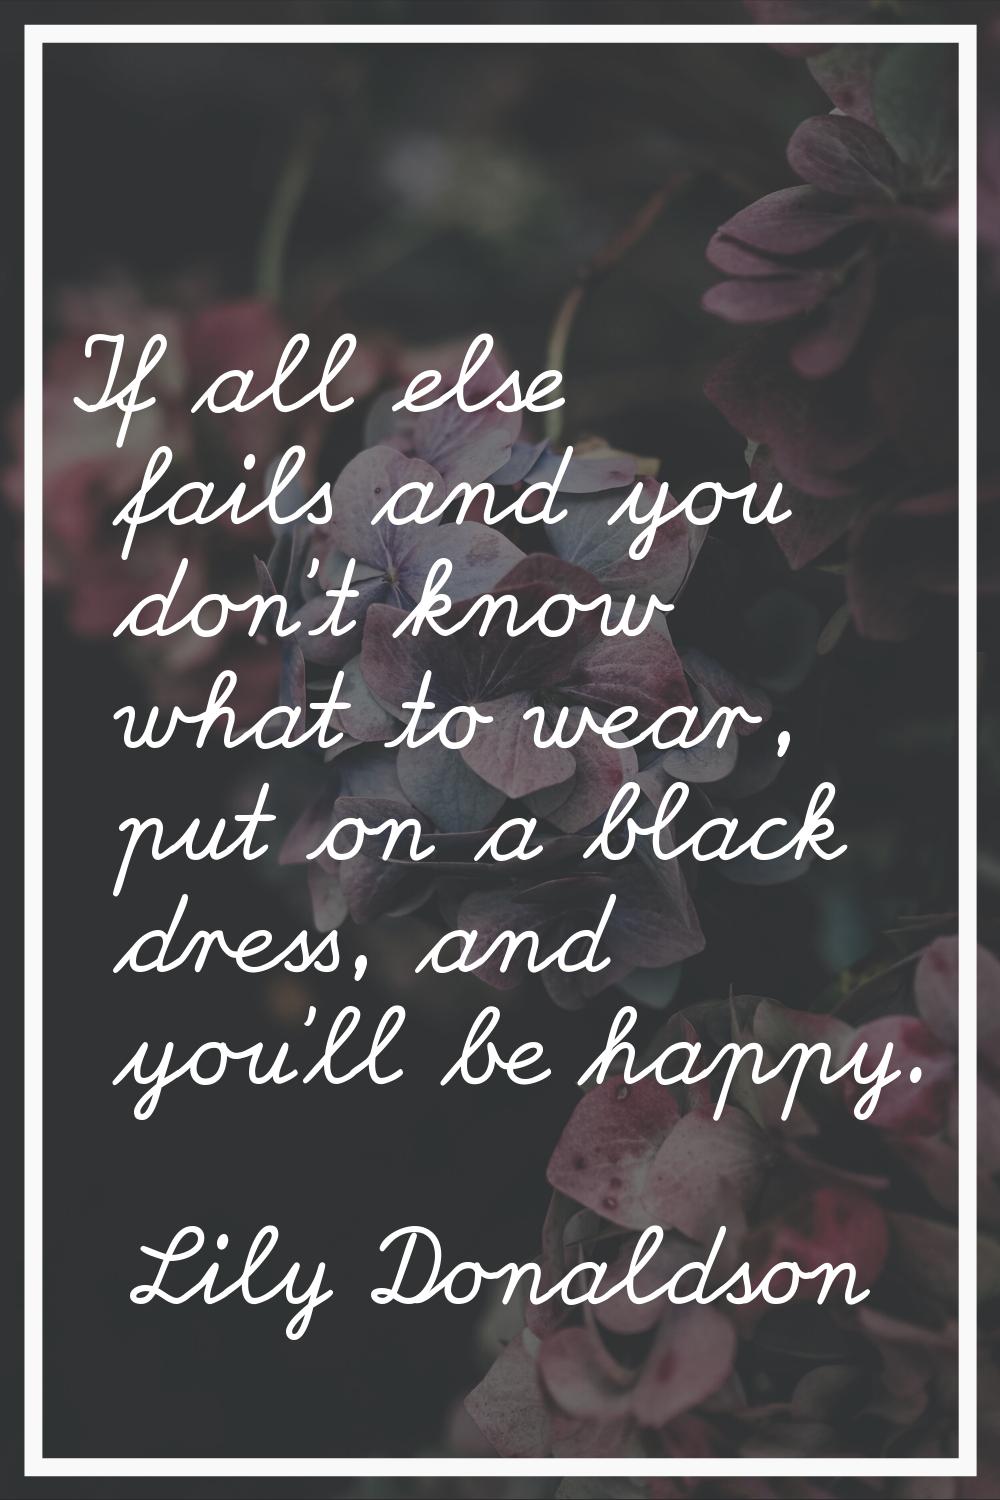 If all else fails and you don't know what to wear, put on a black dress, and you'll be happy.